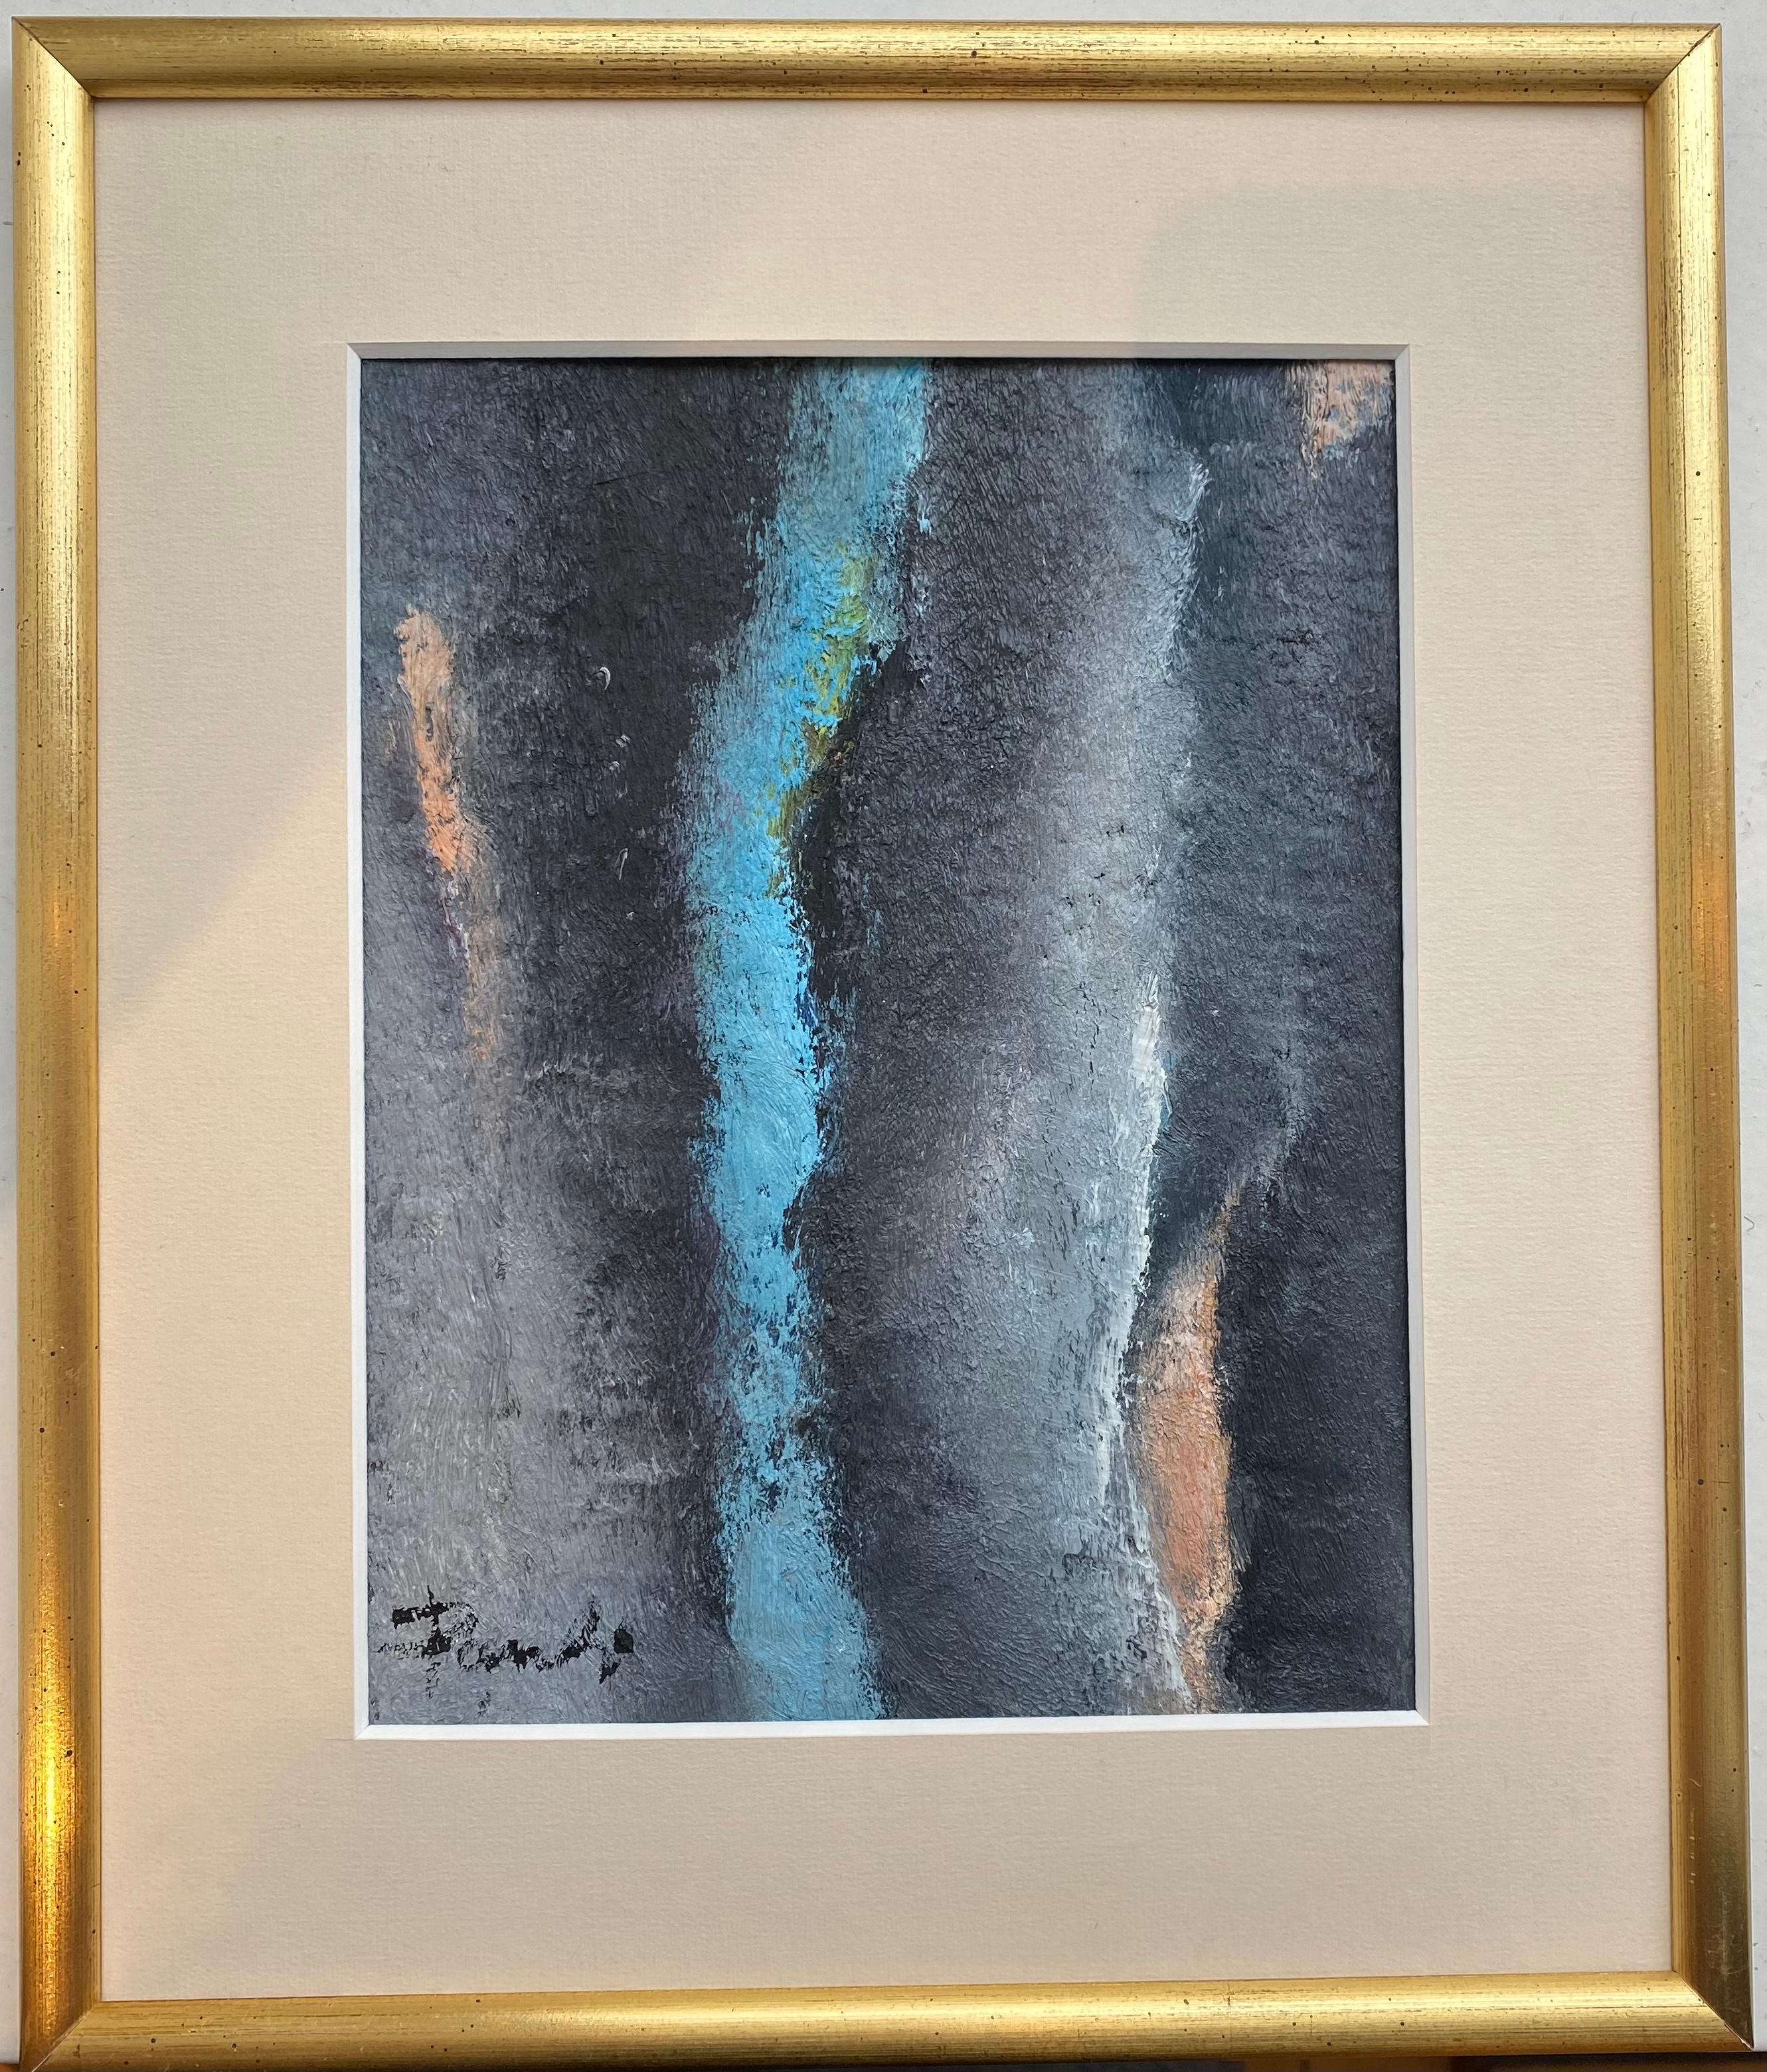 Blue and grey abstract composition n1 by Gilbert Pauli - Oil on canvas 19x23 cm For Sale 2